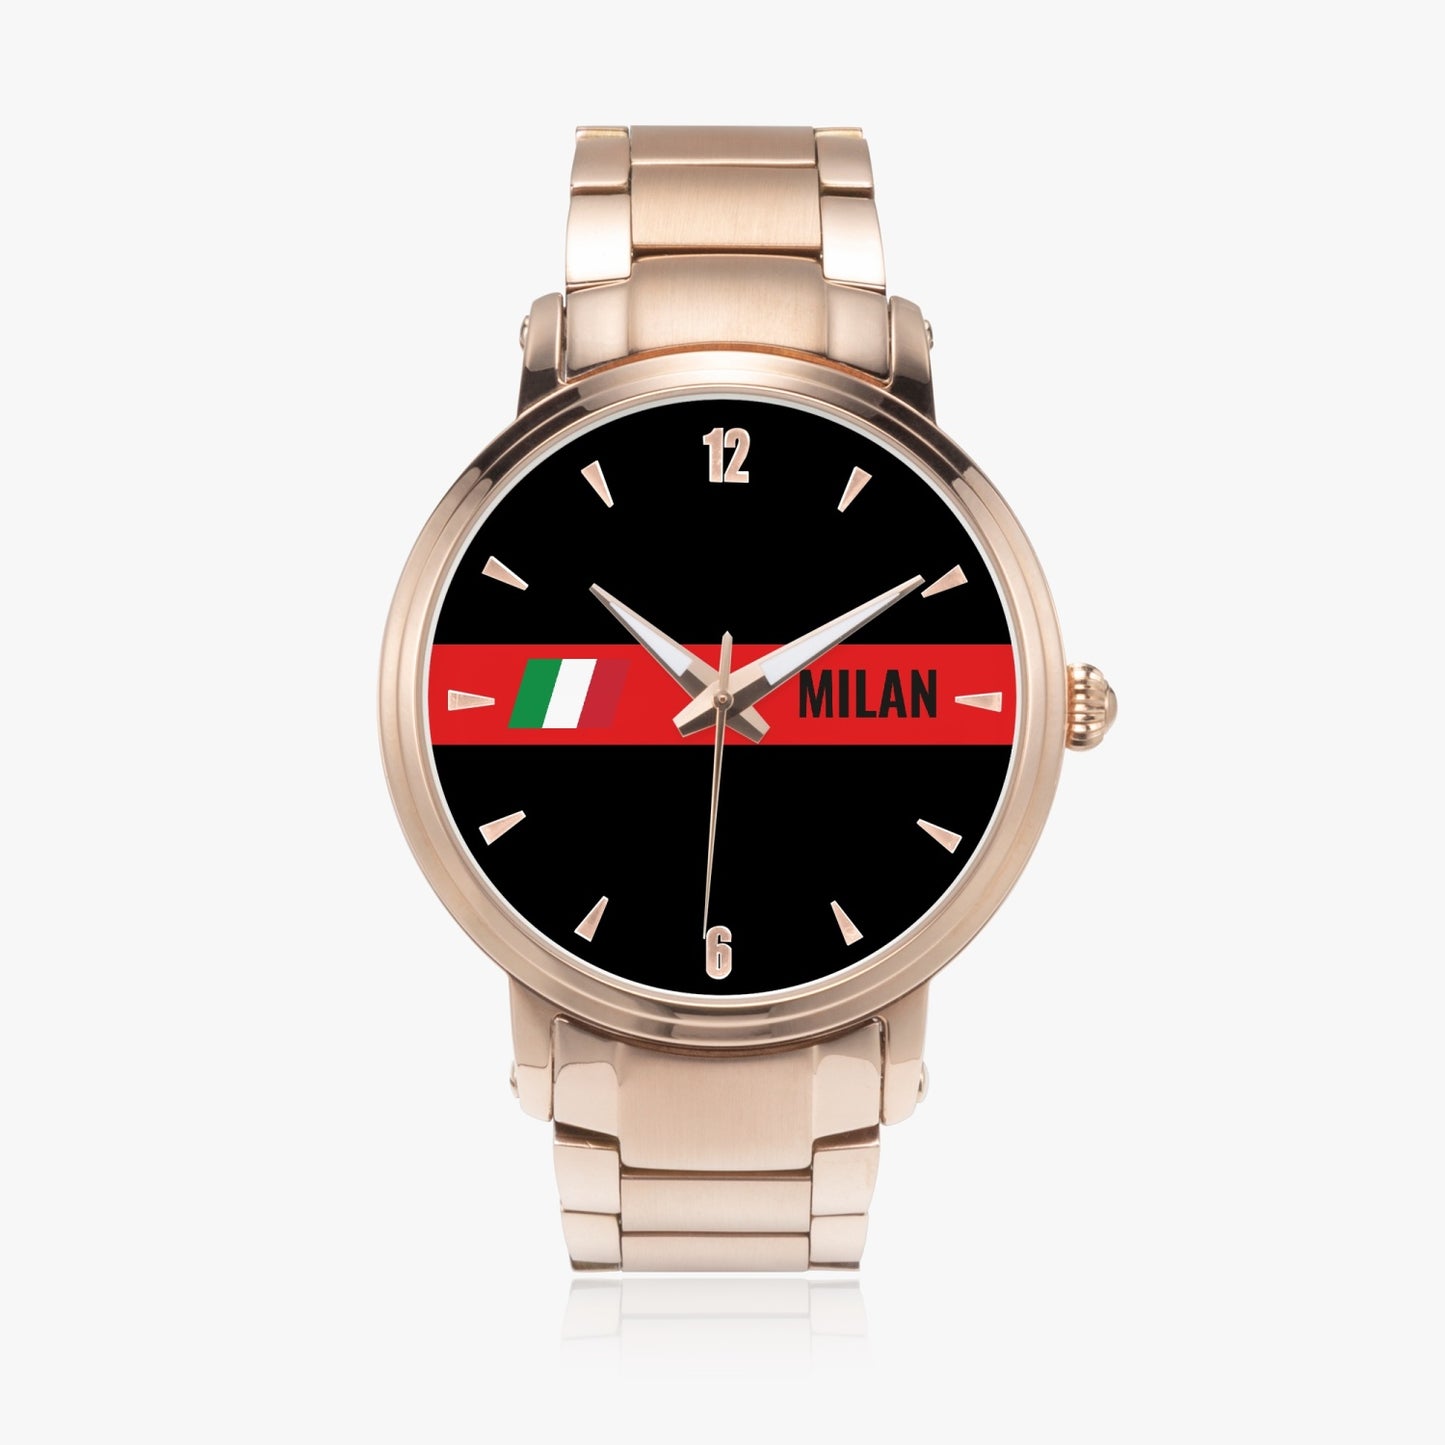 Milan Automatic Movement Watch - Premium Stainless Steel